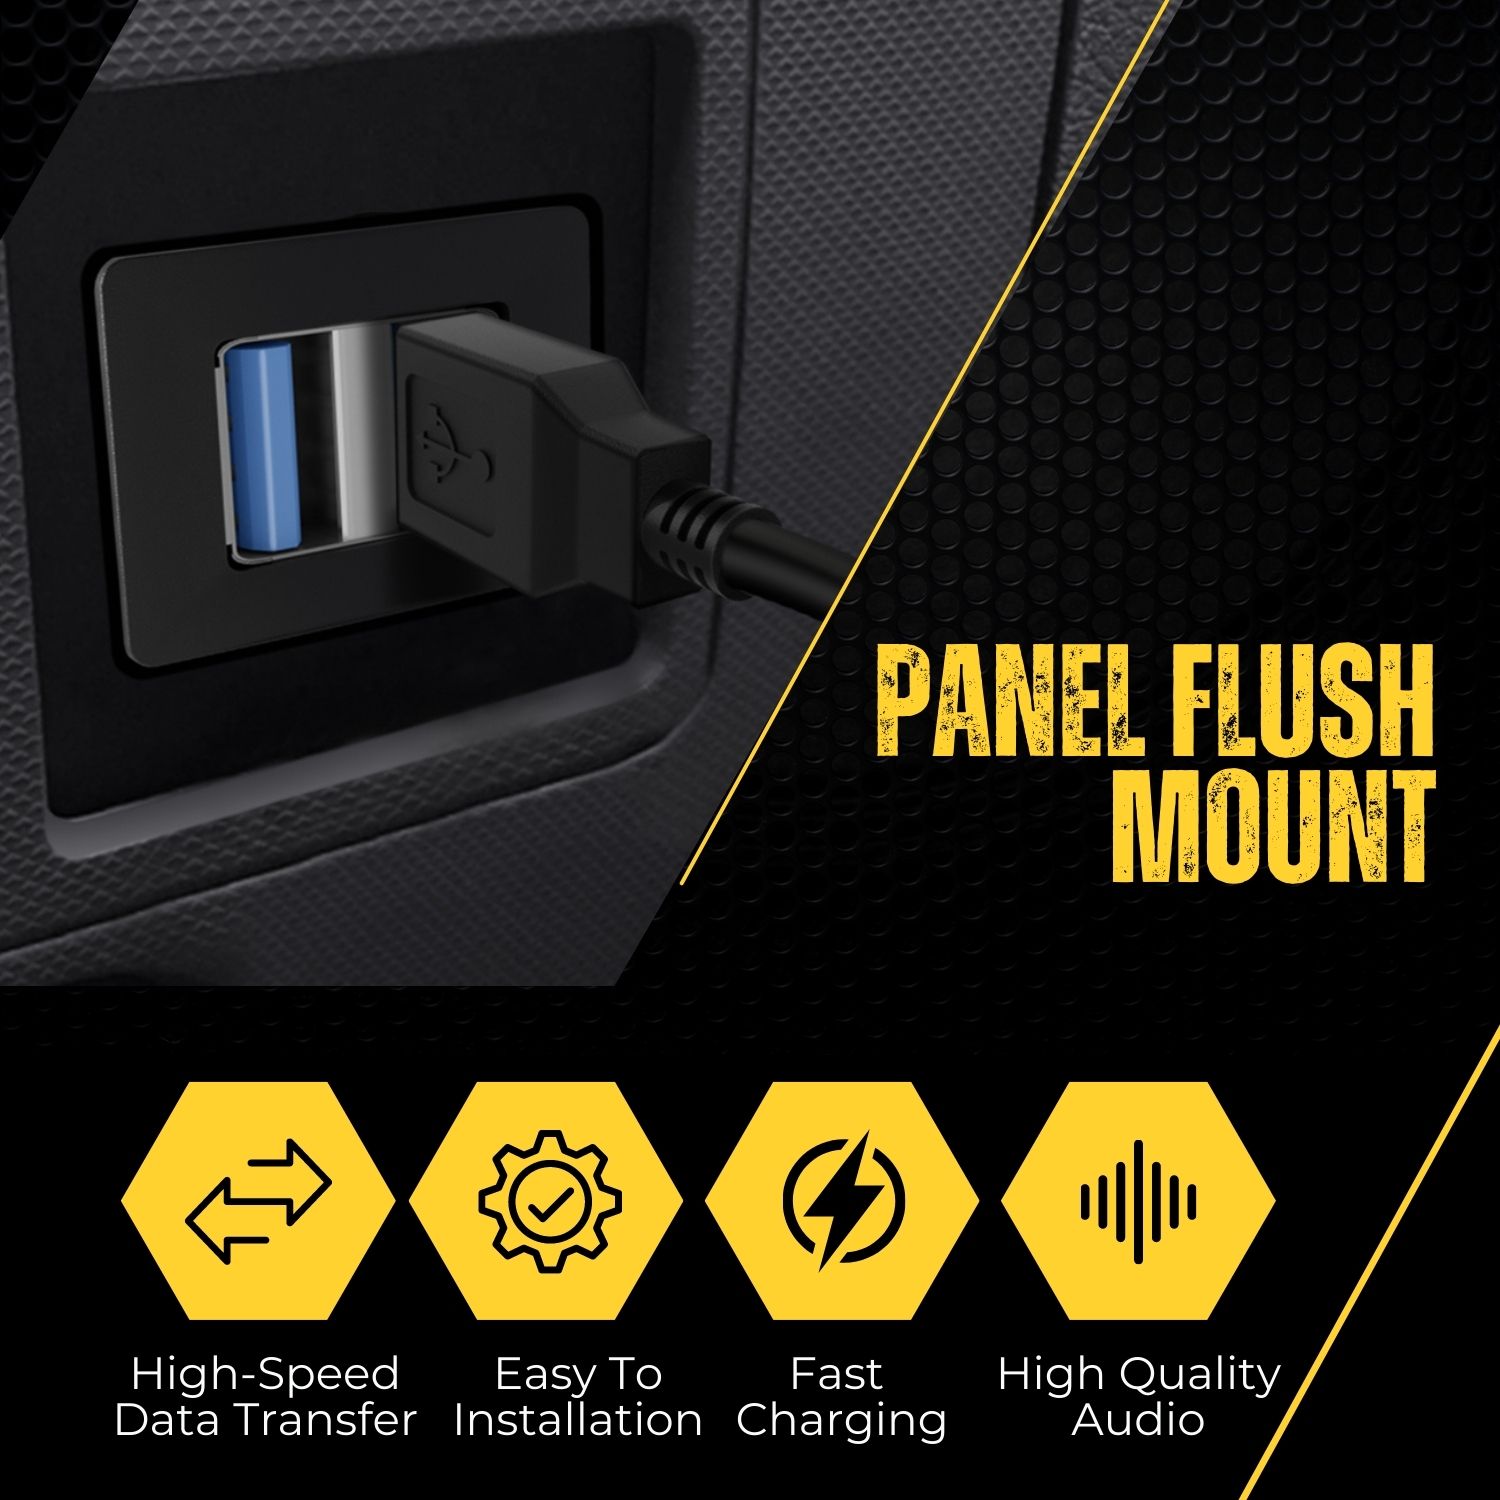 Reliably Made - This Flush Mount USB Port is solidly made with thick layer, well molded ends and the length is sufficiently long for your project